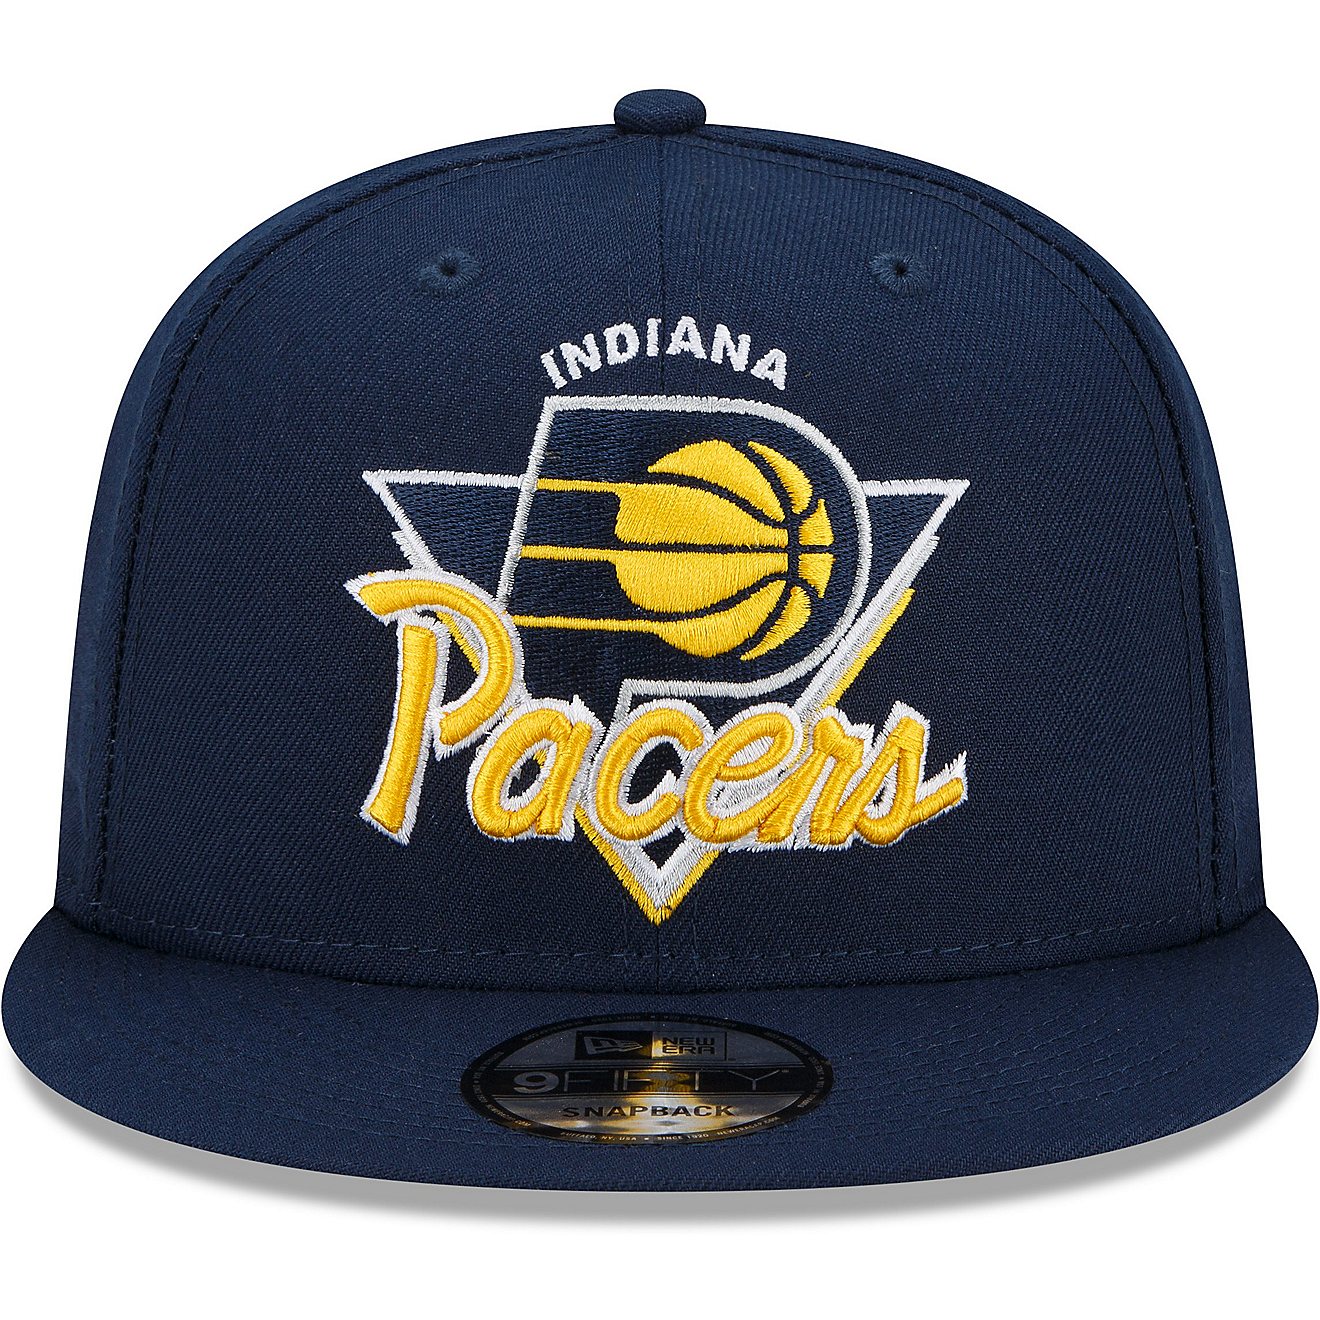 New Era Men's Indiana Pacers '21 Tip Off 9FIFTY Cap                                                                              - view number 3